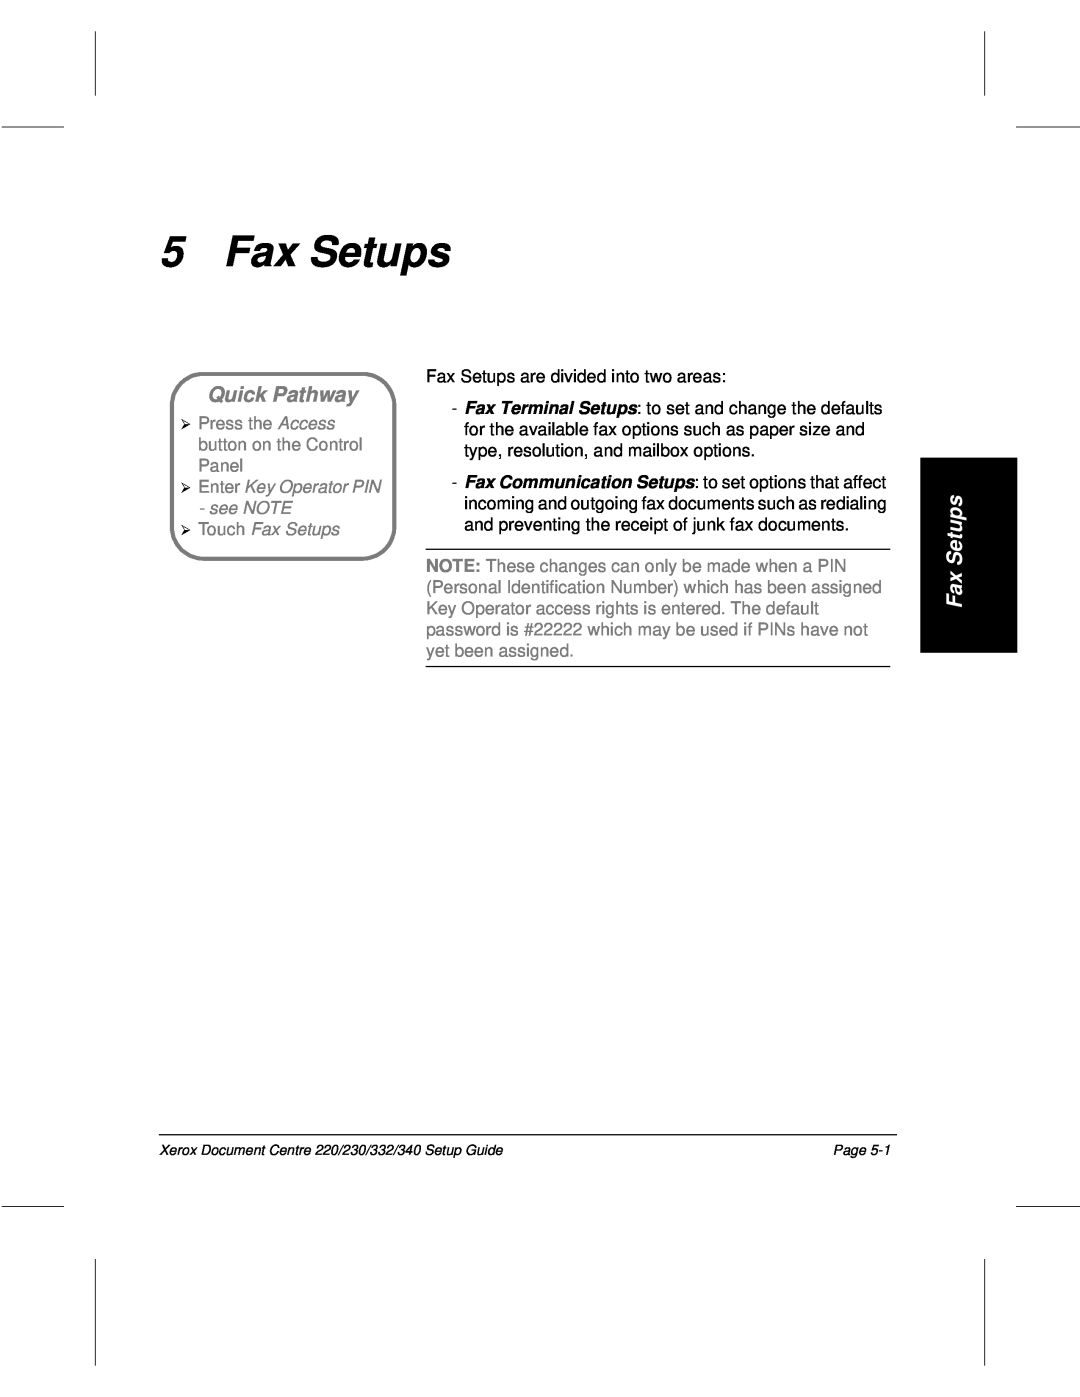 Xerox 230, 340, 332, 220 setup guide Fax Setups, Quick Pathway, Press the Access button on the Control Panel 